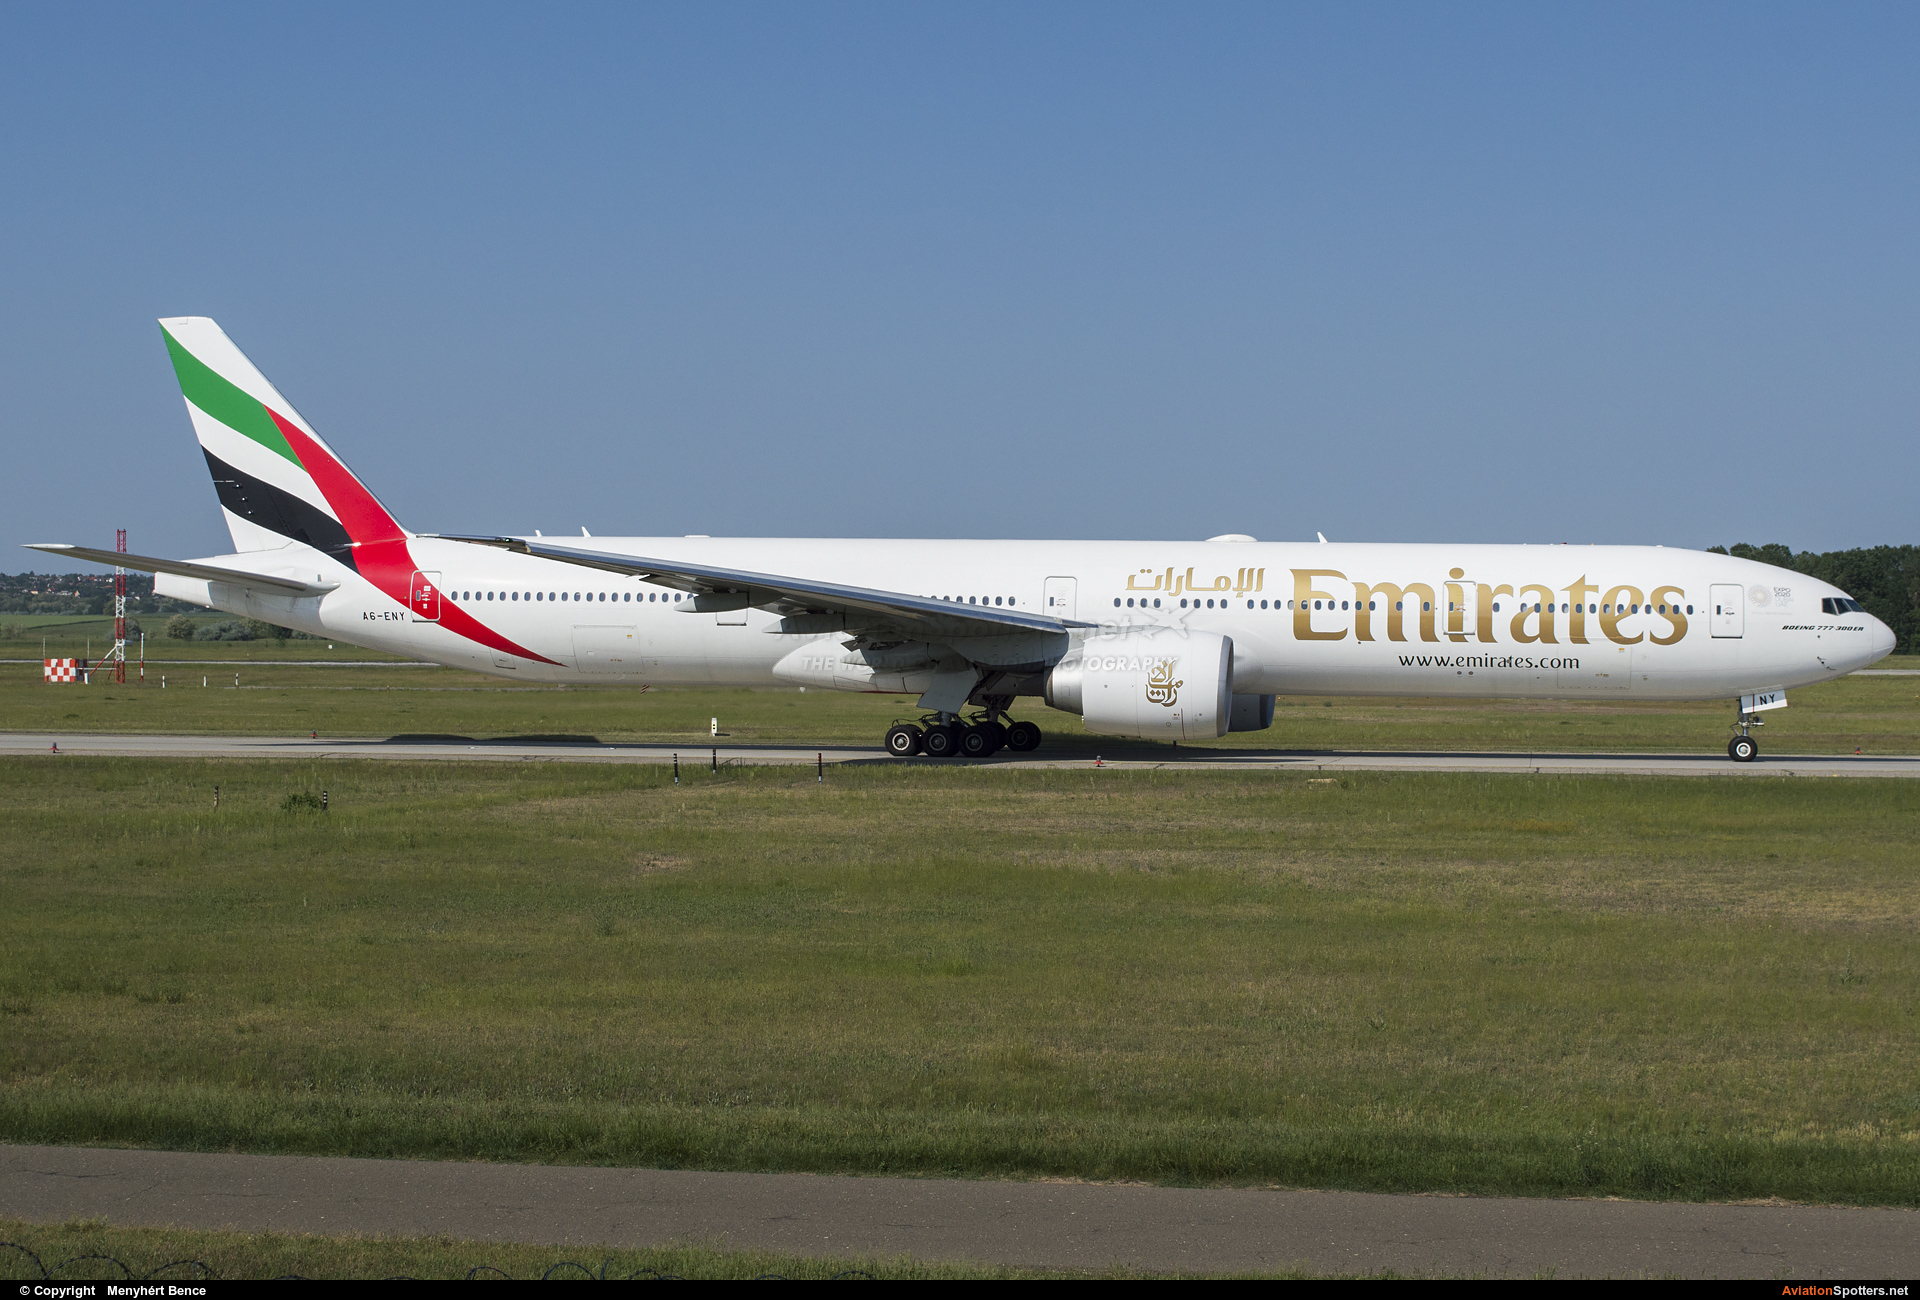 Emirates Airlines  -  777-300ER  (A6-ENY) By Menyhért Bence (hadesdras91)